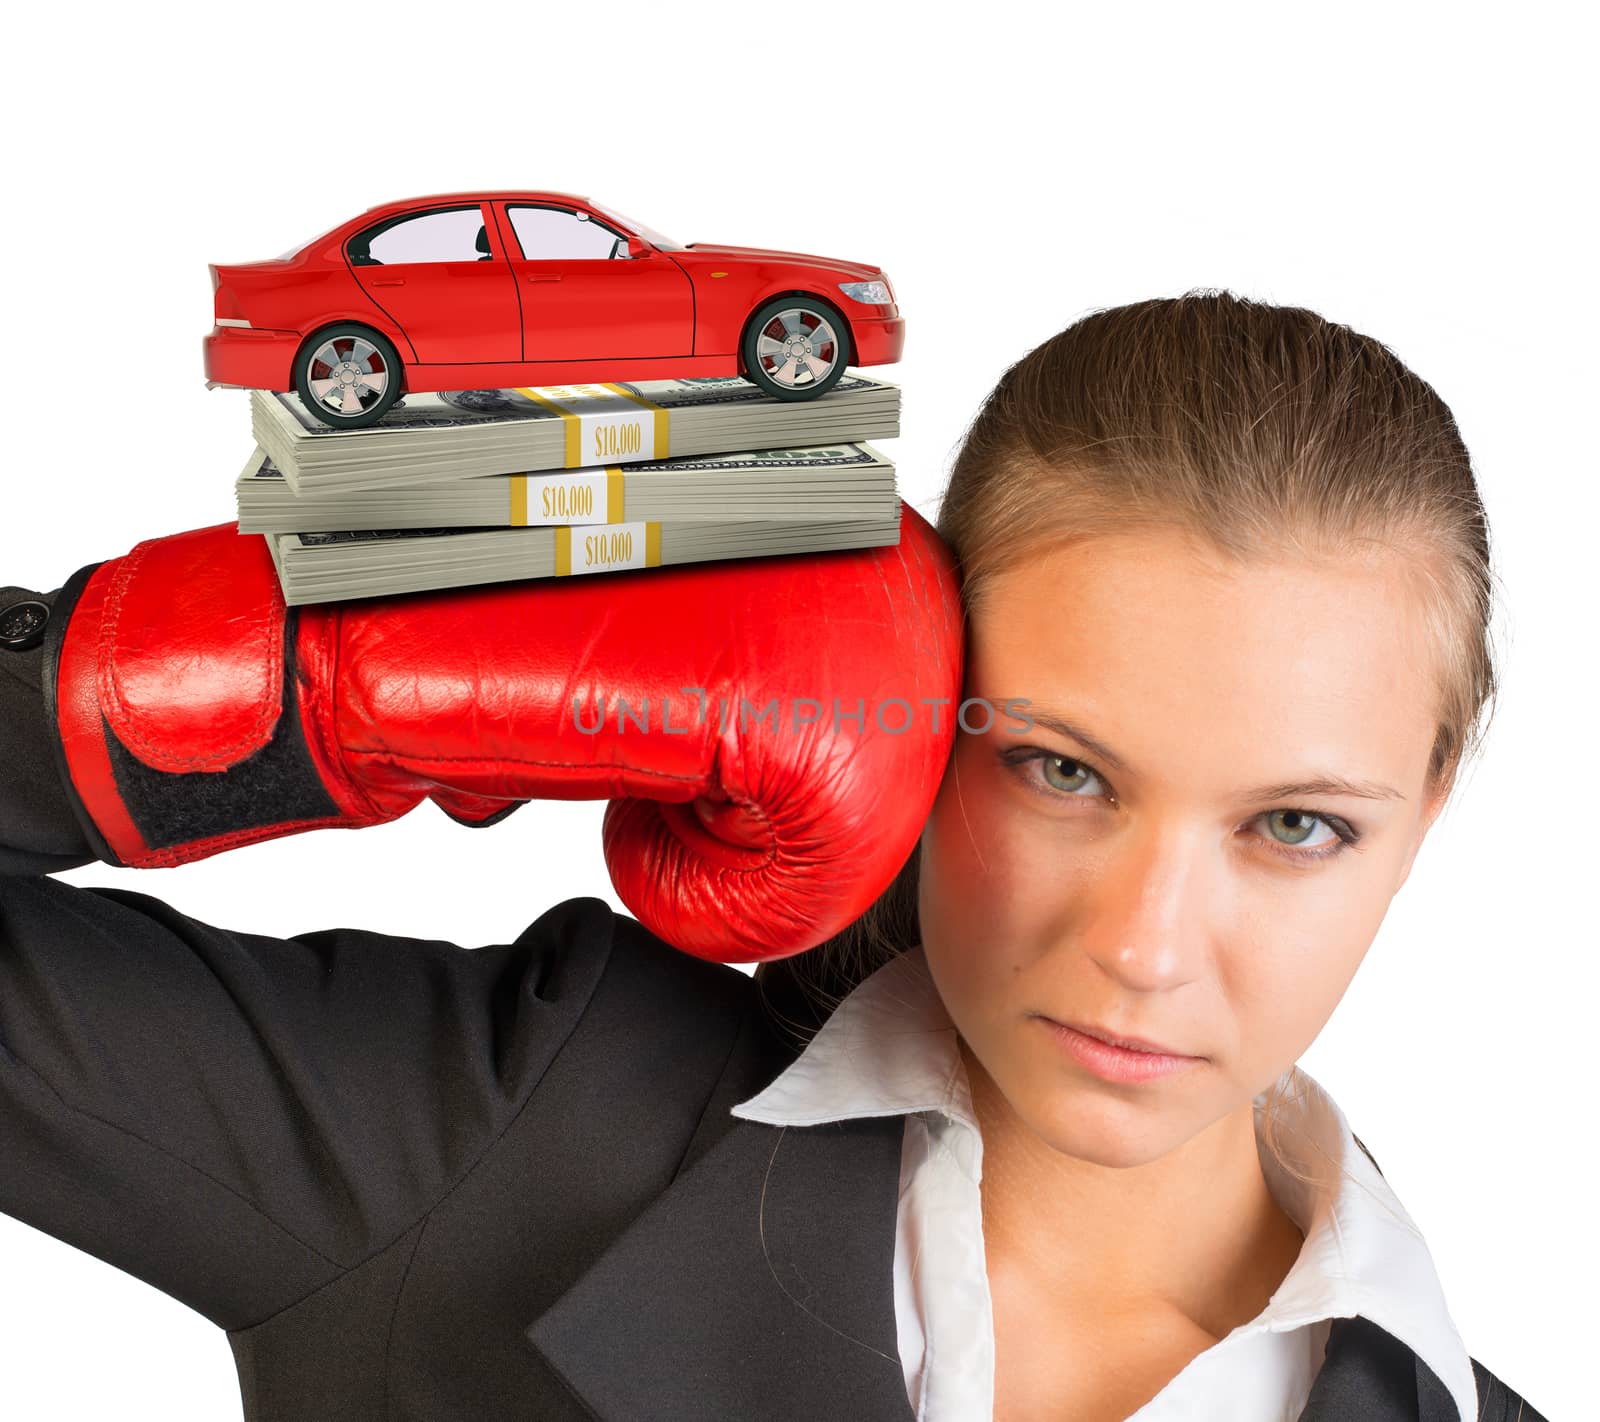 Businesswoman in boxing gloves with red car and money looking at camera on isolated white background